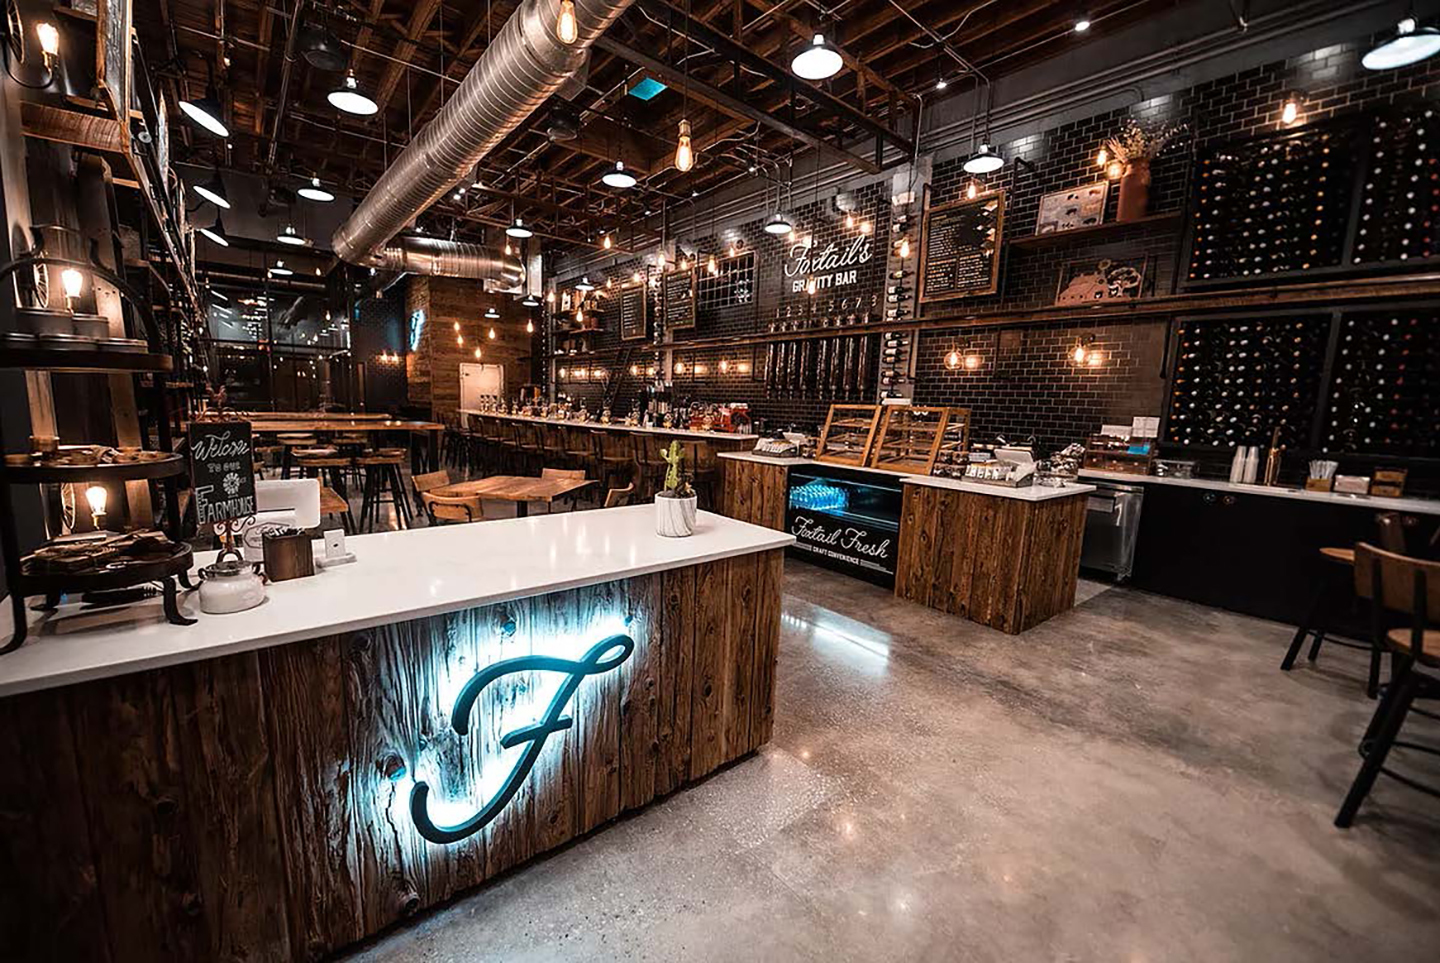 Foxtail Coffee Co. has 26 locations, most in Central Florida.